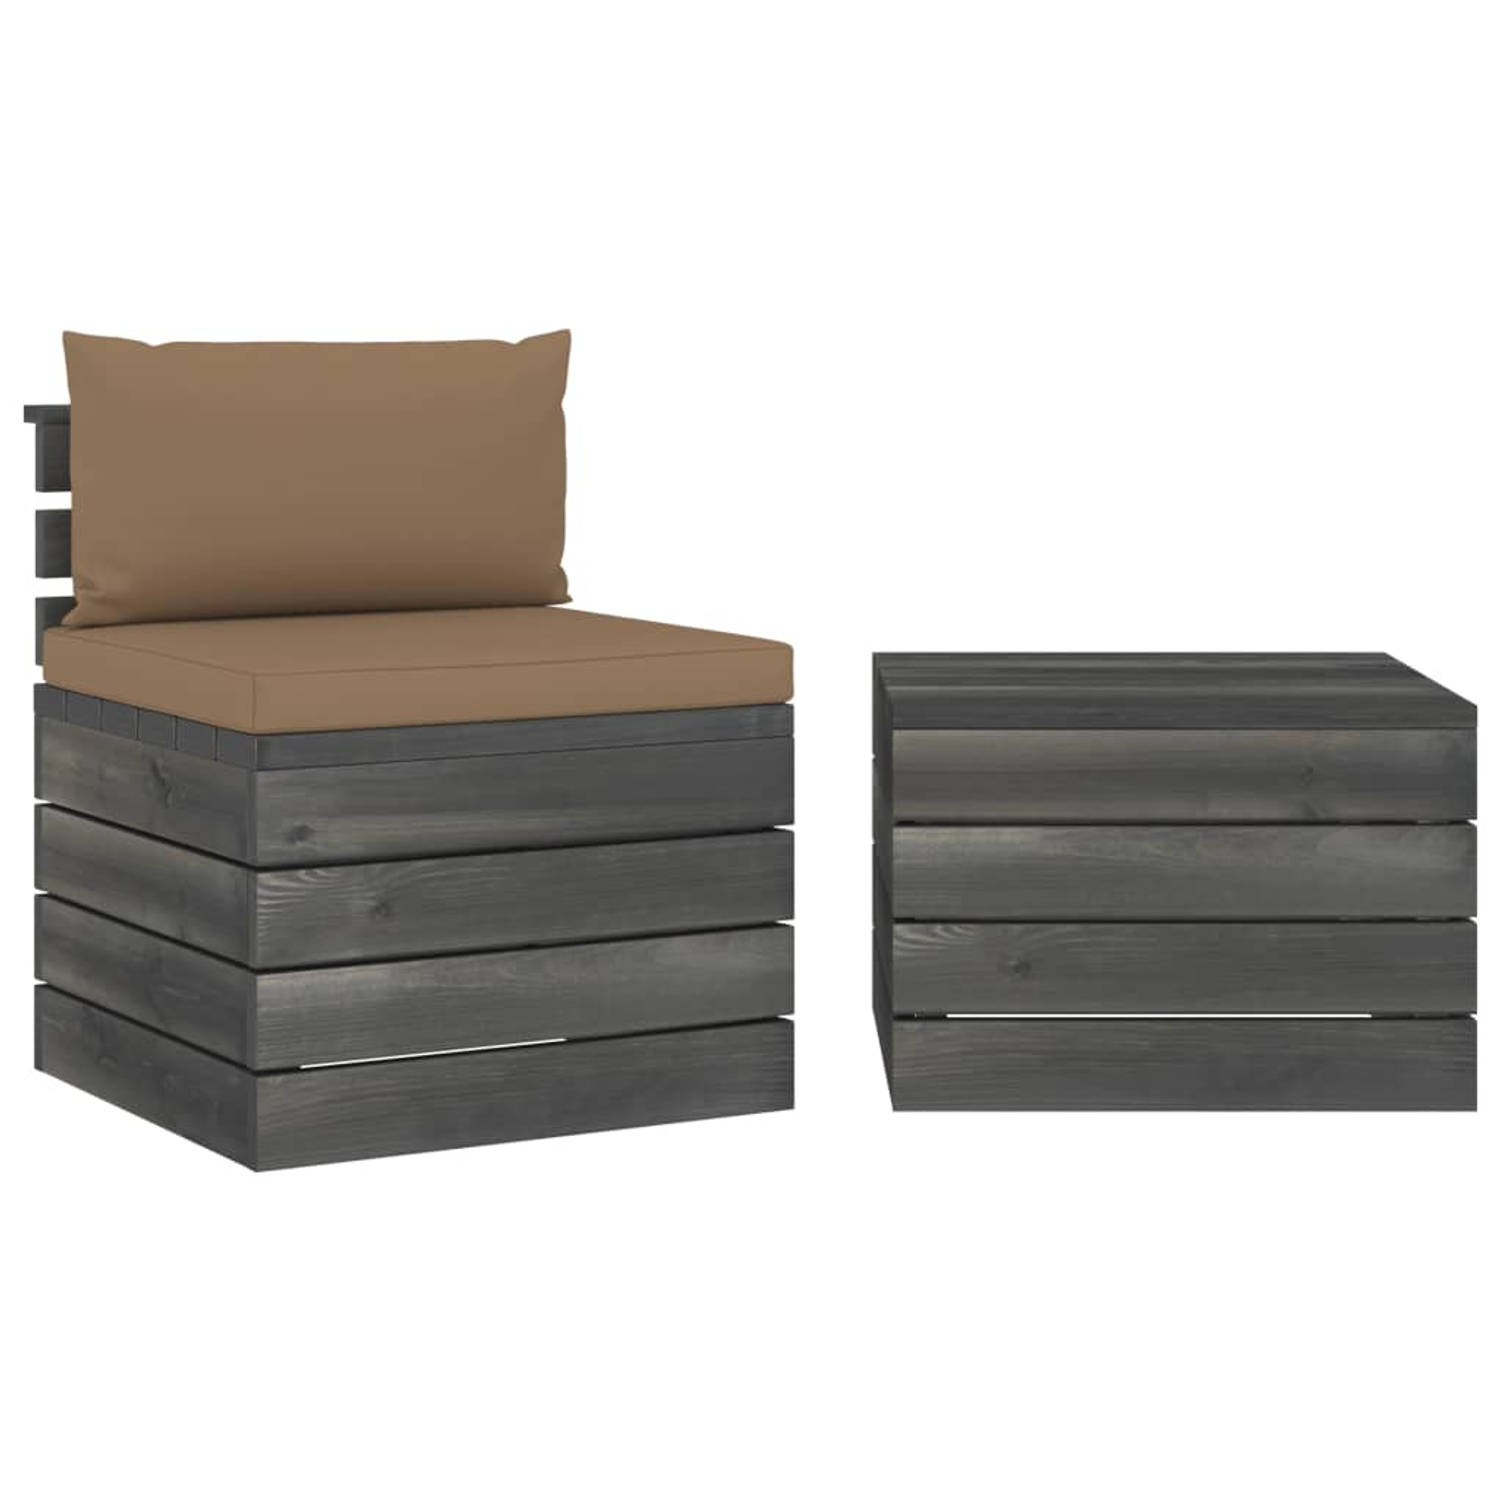 The Living Store Pallet Loungeset - Grenenhout - Taupe Kussens - Modulair - 60x65x71.5cm - 60x60x41.5cm - 60x60x6cm - 60x38x13cm